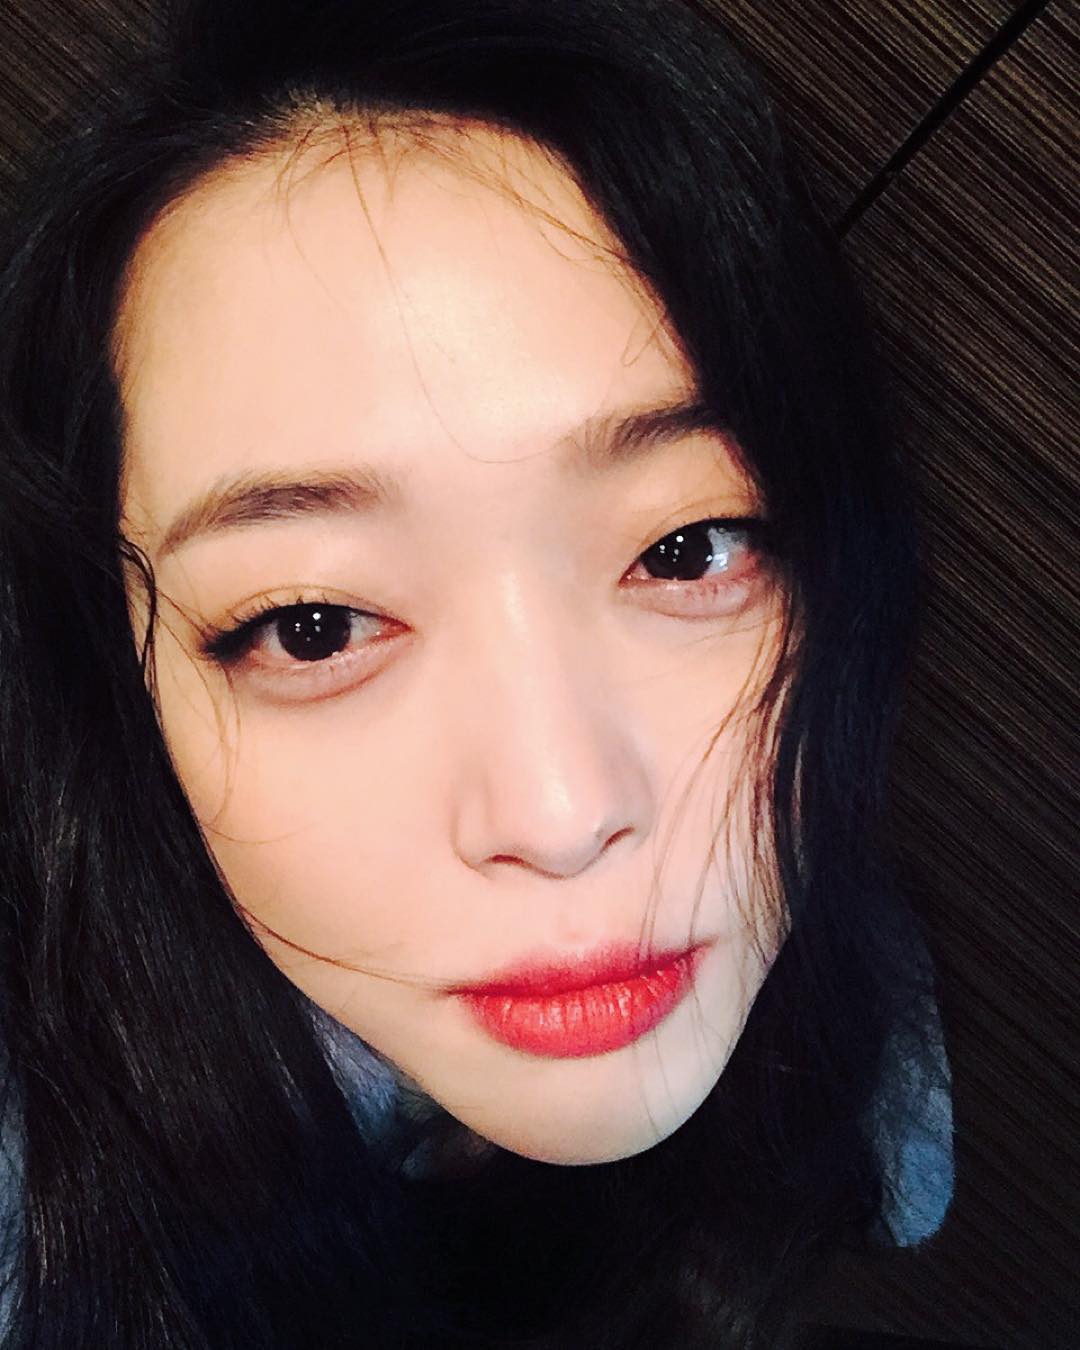 Choi Sulli greets fans with her pretty Selfie - SNSD | OH!GG | f(x)